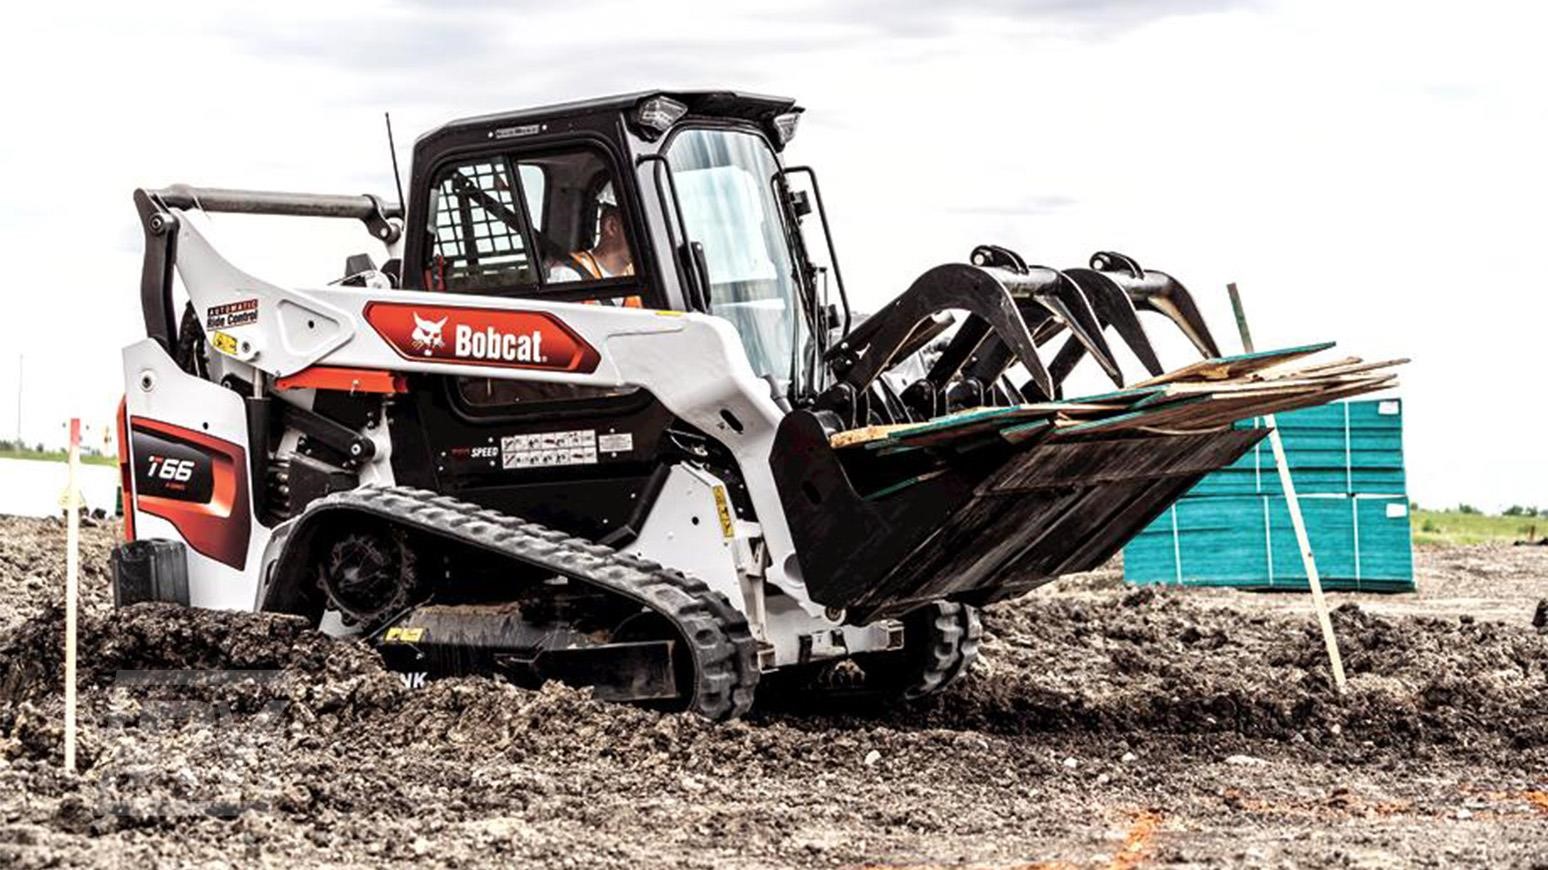 Bobcat Adds To Its RSeries Of Compact Track Loaders & Skid Steers